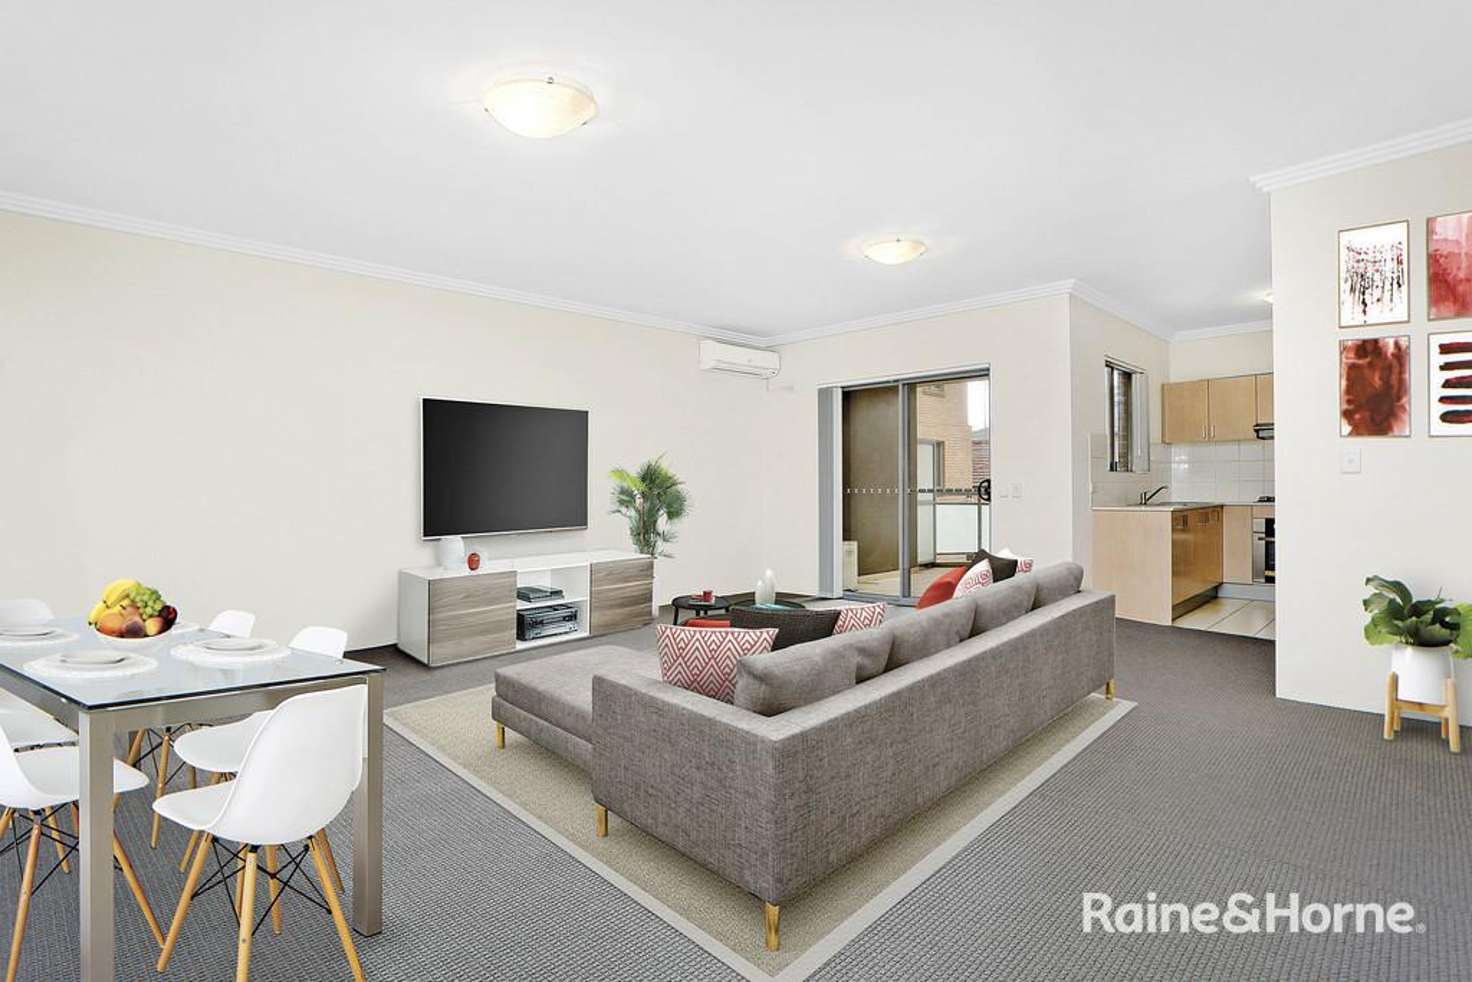 Main view of Homely unit listing, 14/1-3 Putland Street, St Marys NSW 2760